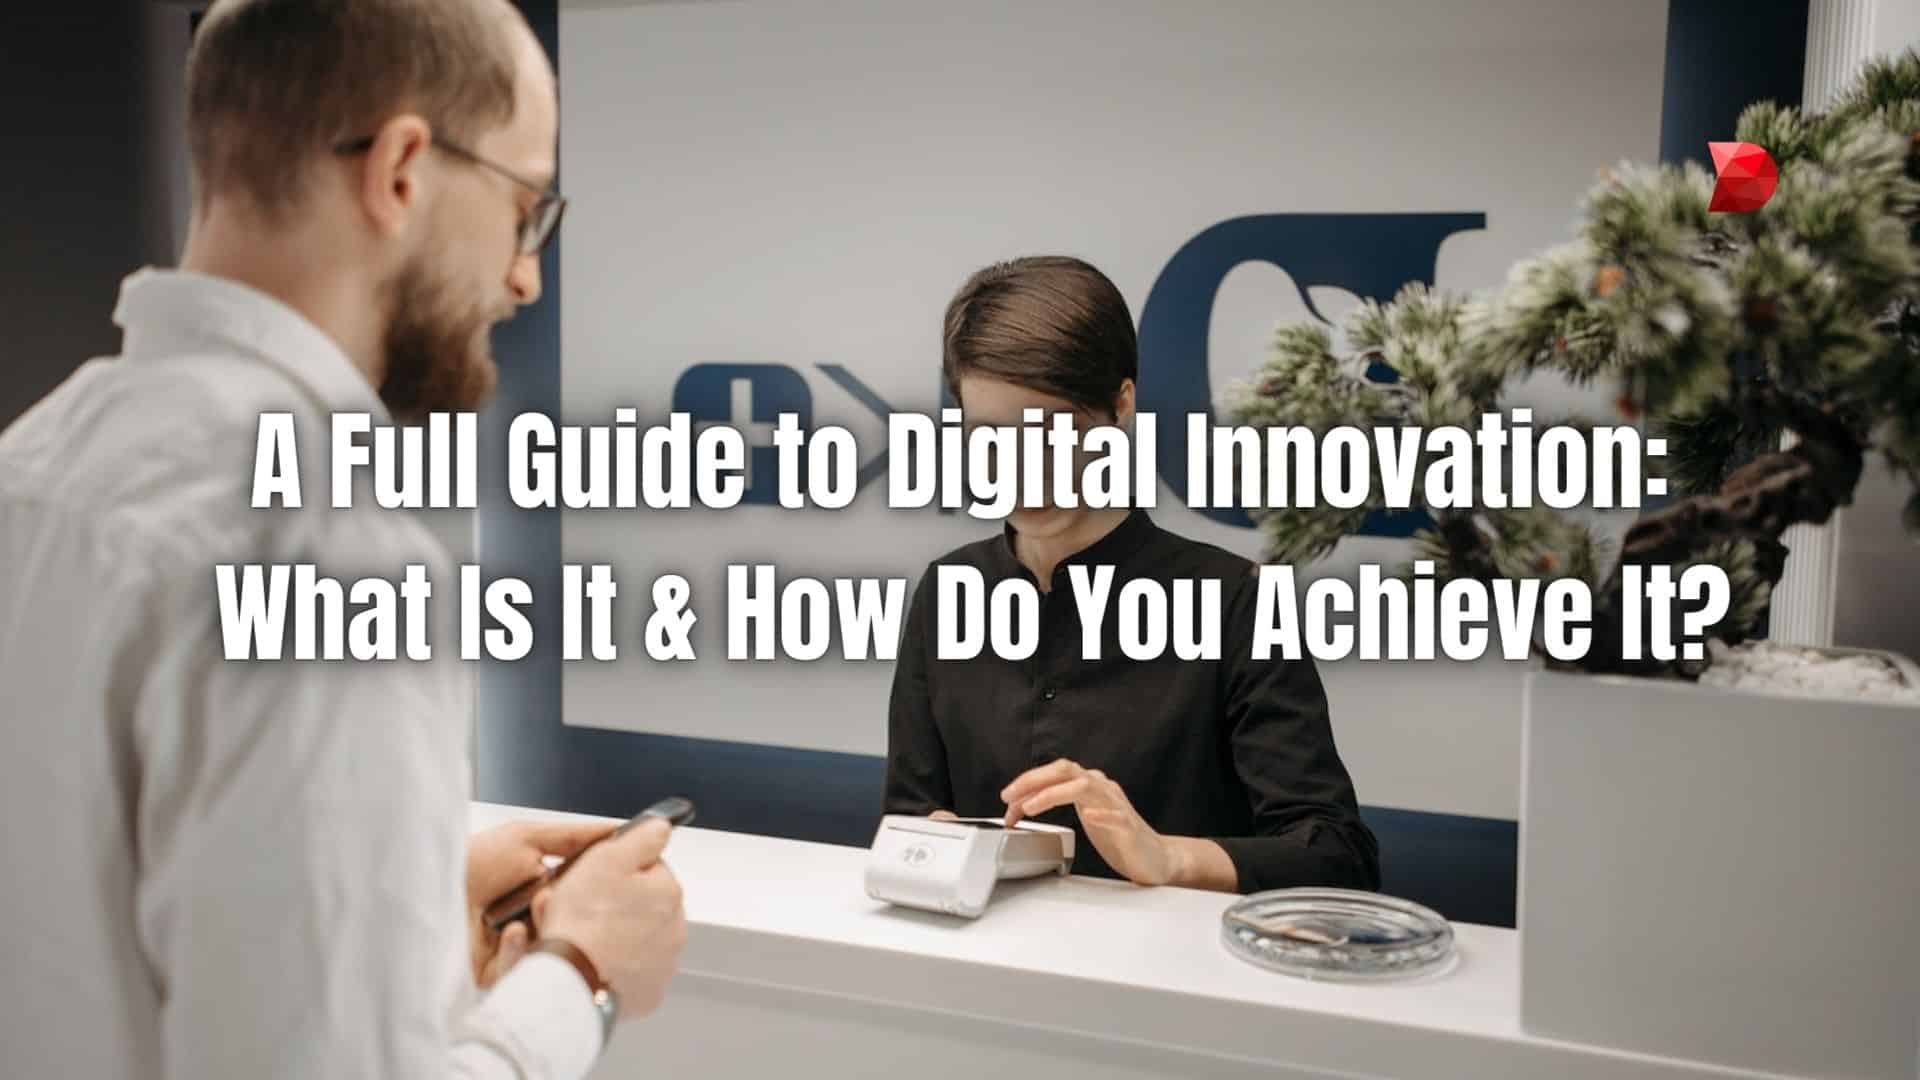 A Full Guide to Digital Innovation What Is It & How Do You Achieve It